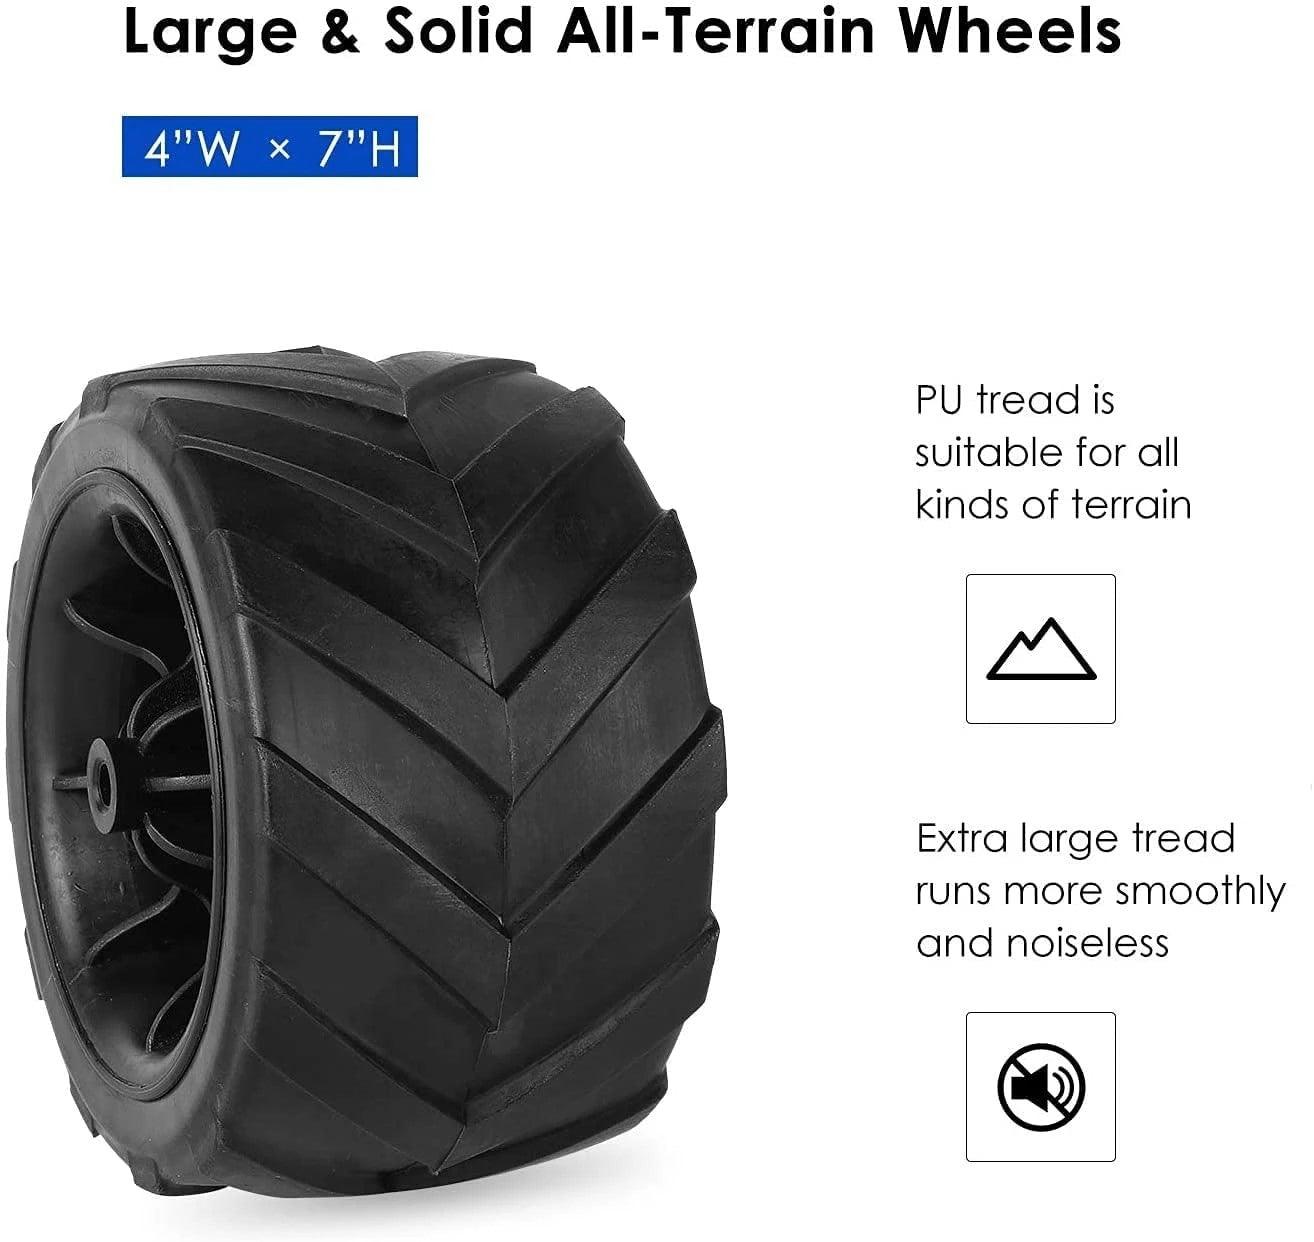 Large solid all terrain wheels